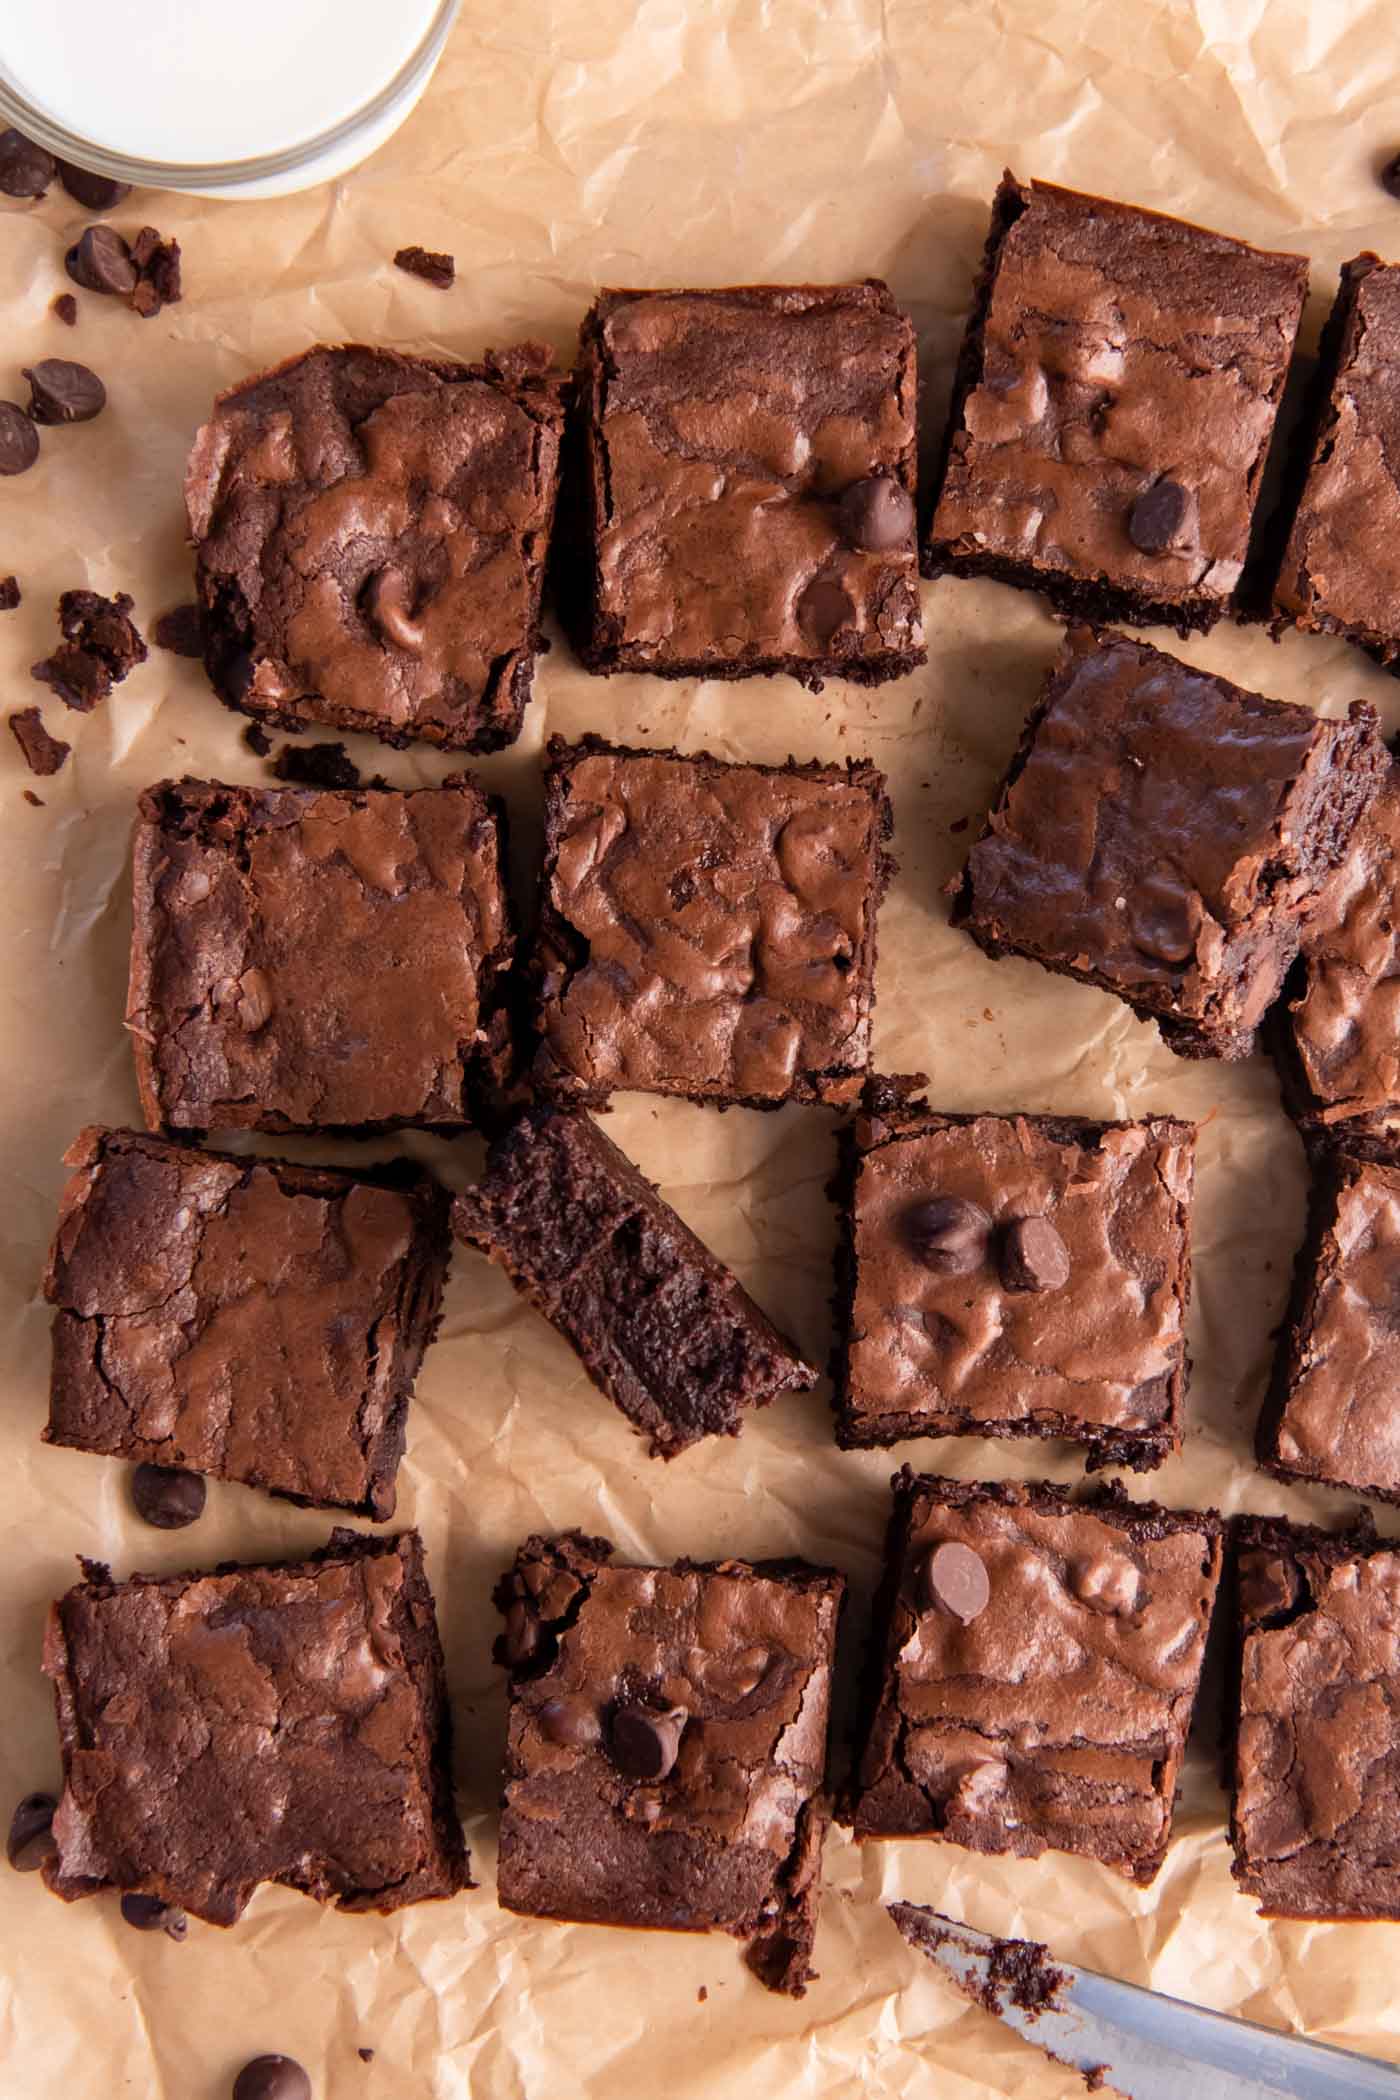 Brownies cut into squares and arranged on a sheet of parchment paper.